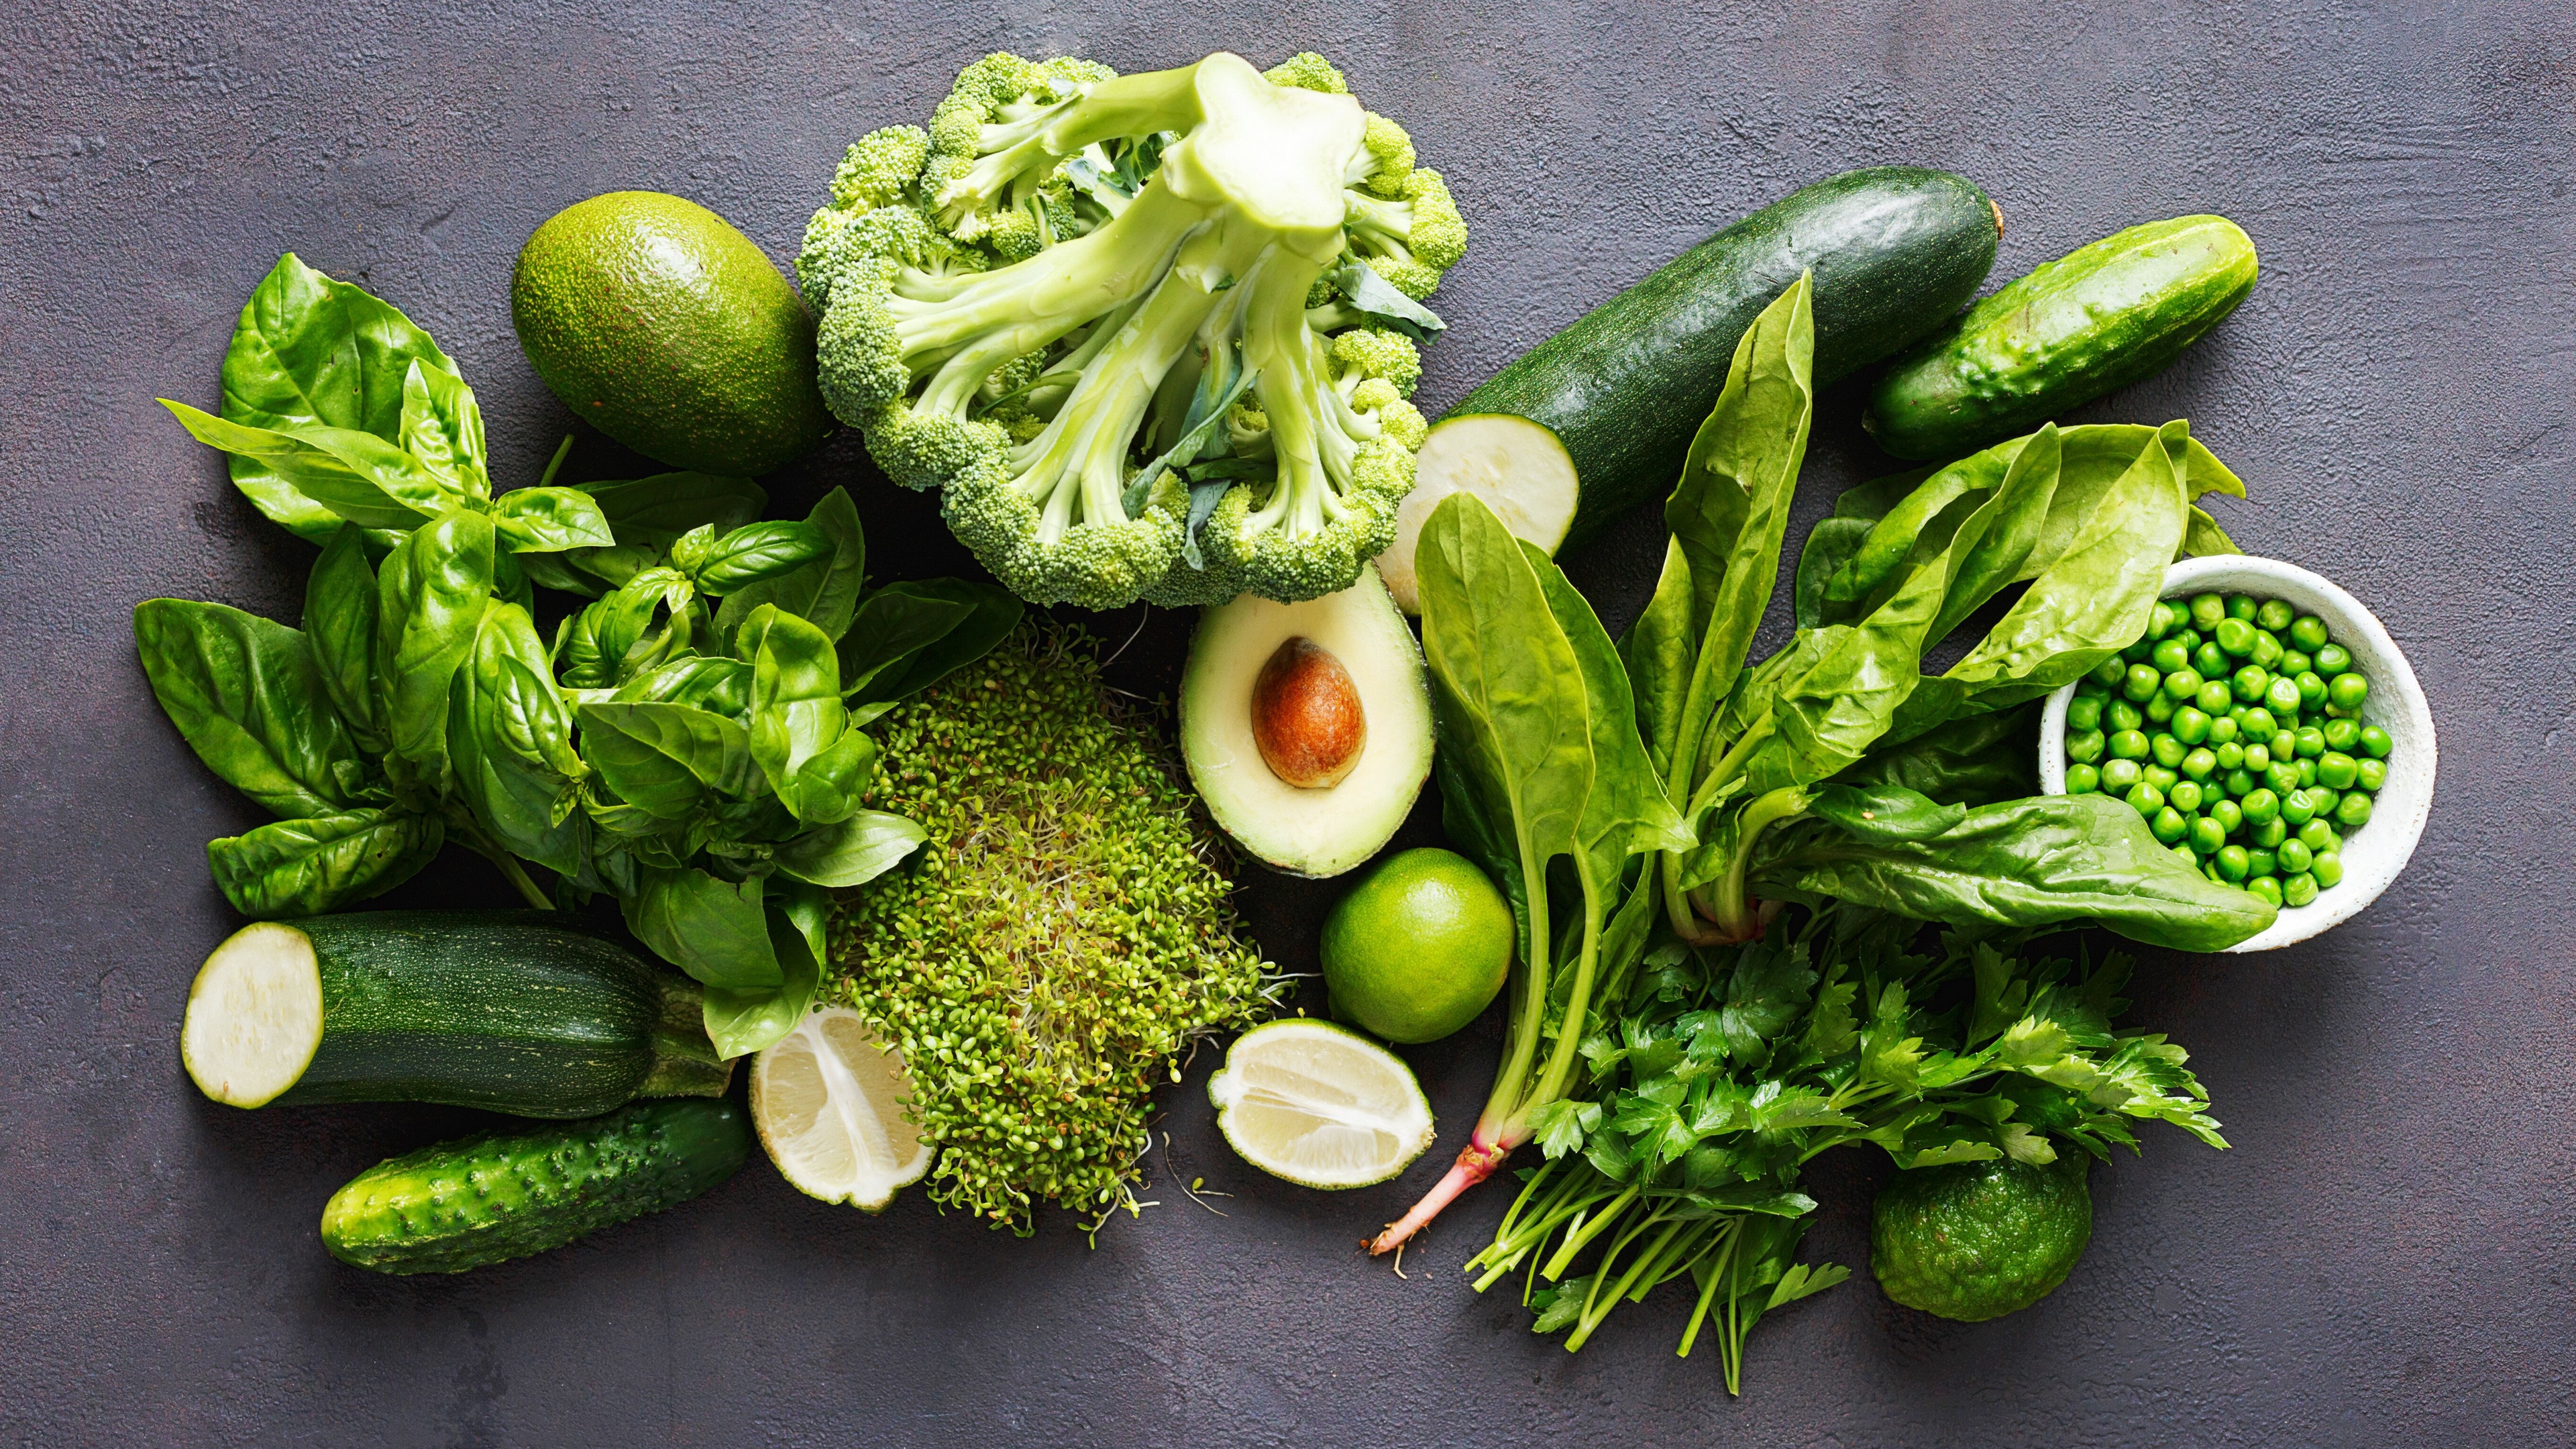 A green selection of vegetables